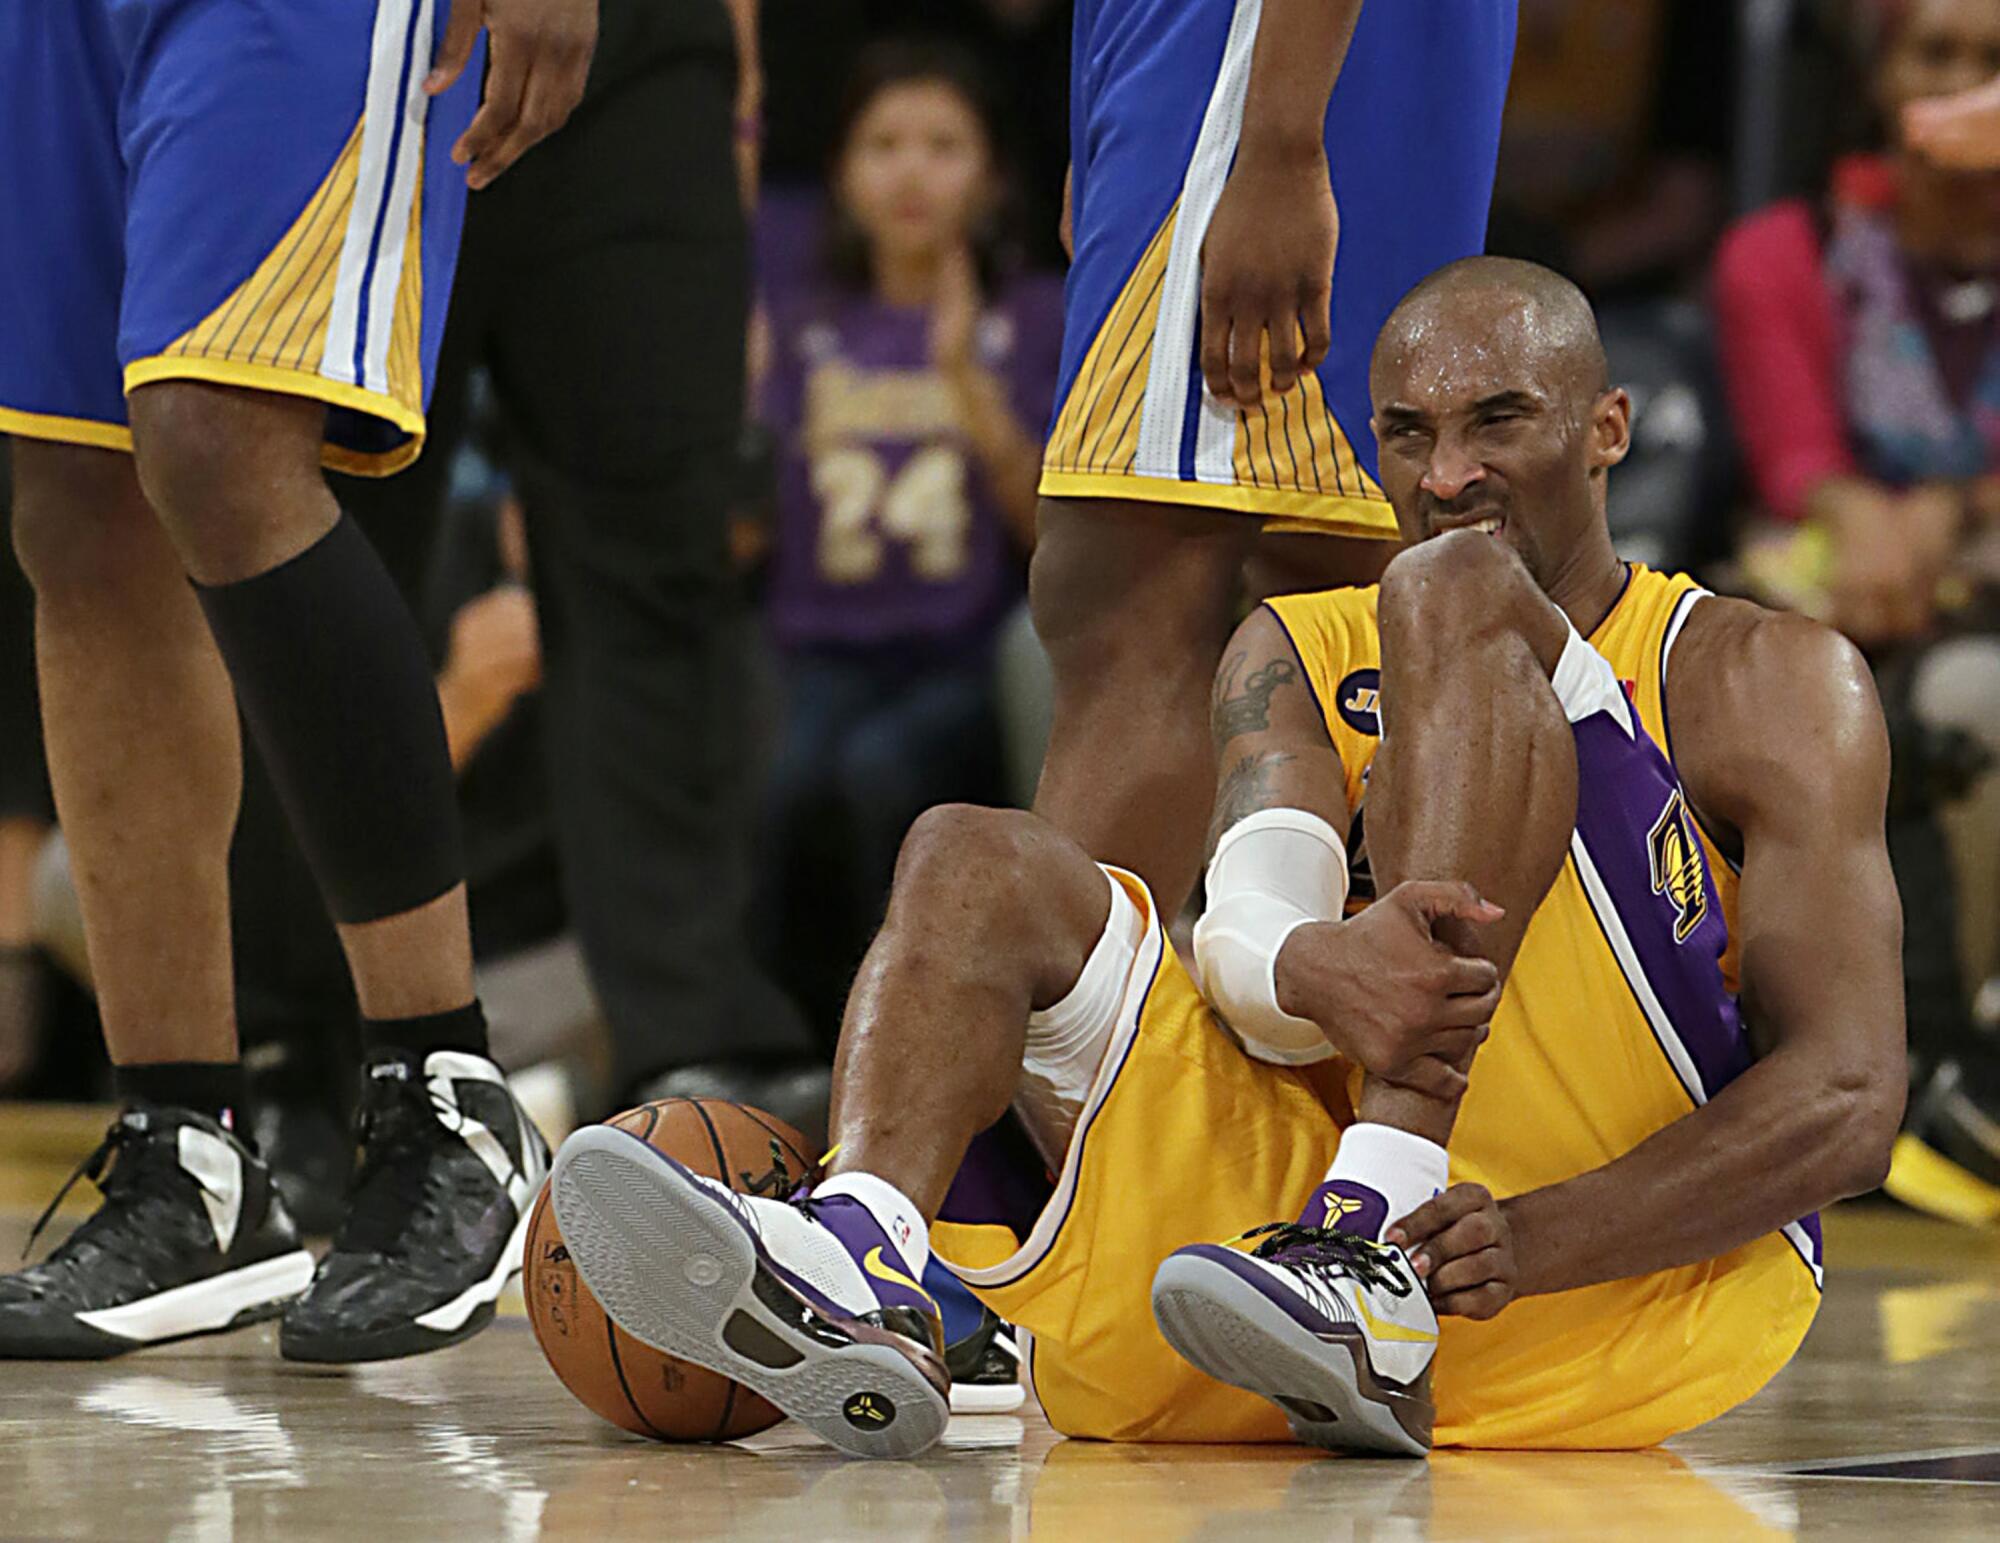 Kobe Bryant writhes in pain after suffering a torn Achilles tendon during a game against the Warriors.